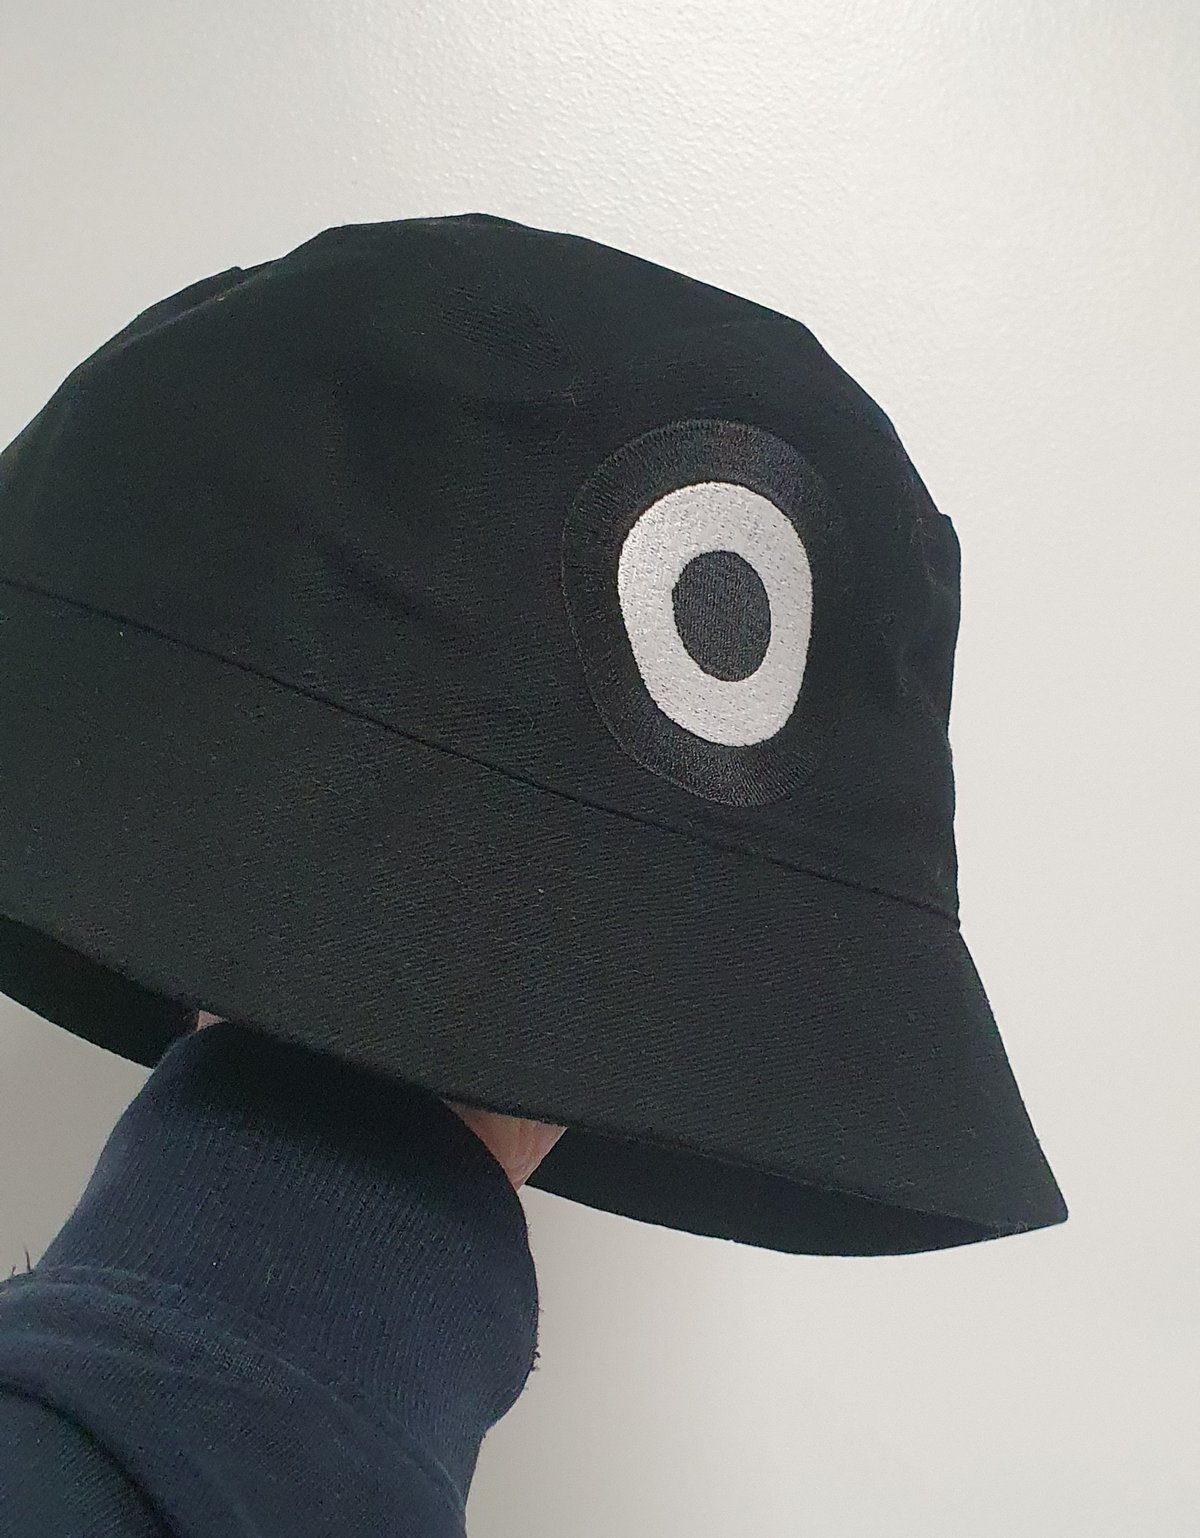 Black Bucket Hat With embroidered Black and white MOD logo. Size Medium.